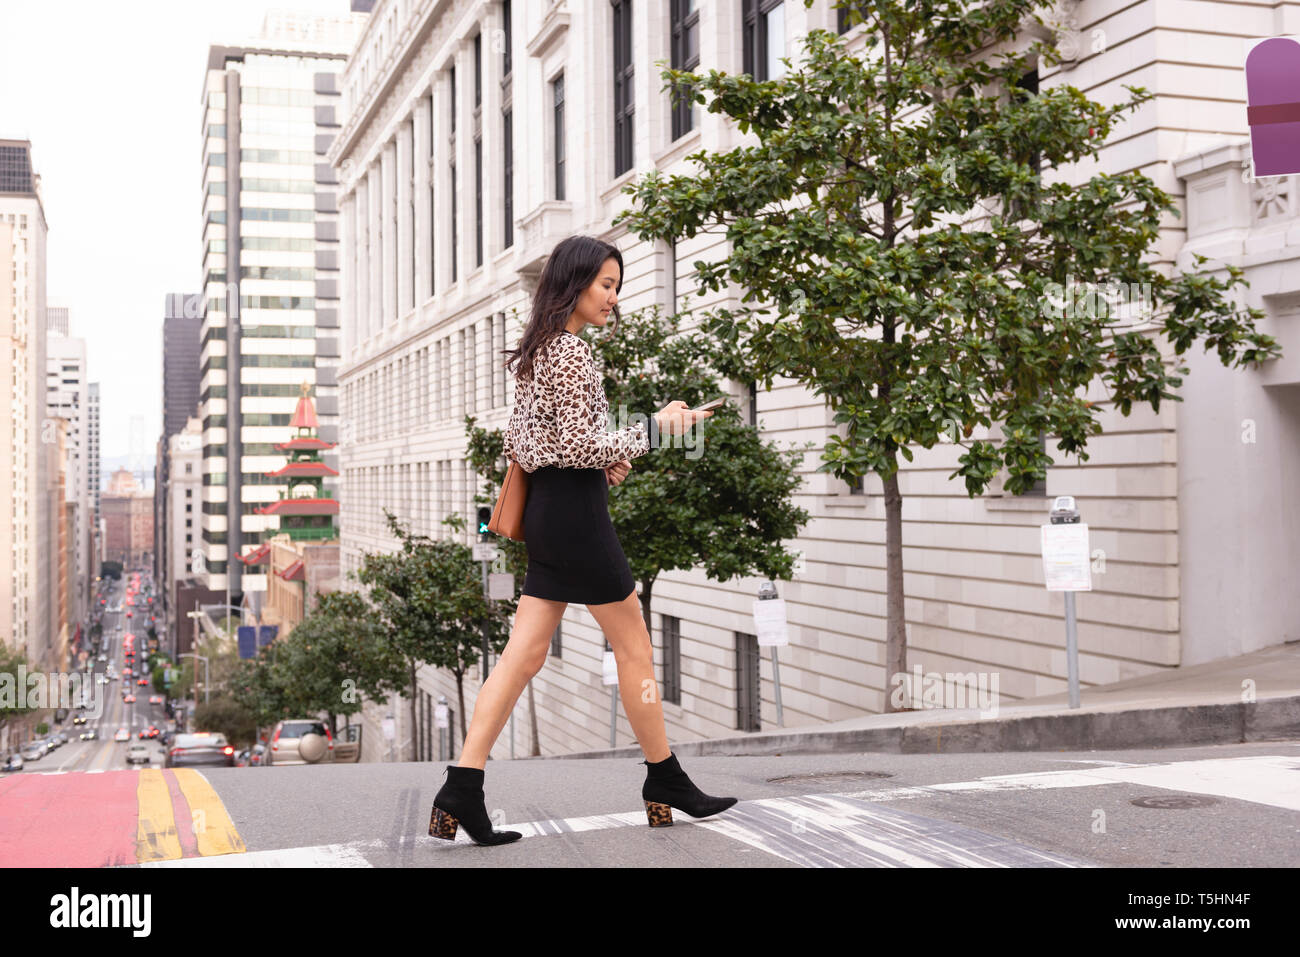 Beautiful woman using mobile phone while walking from street Stock Photo